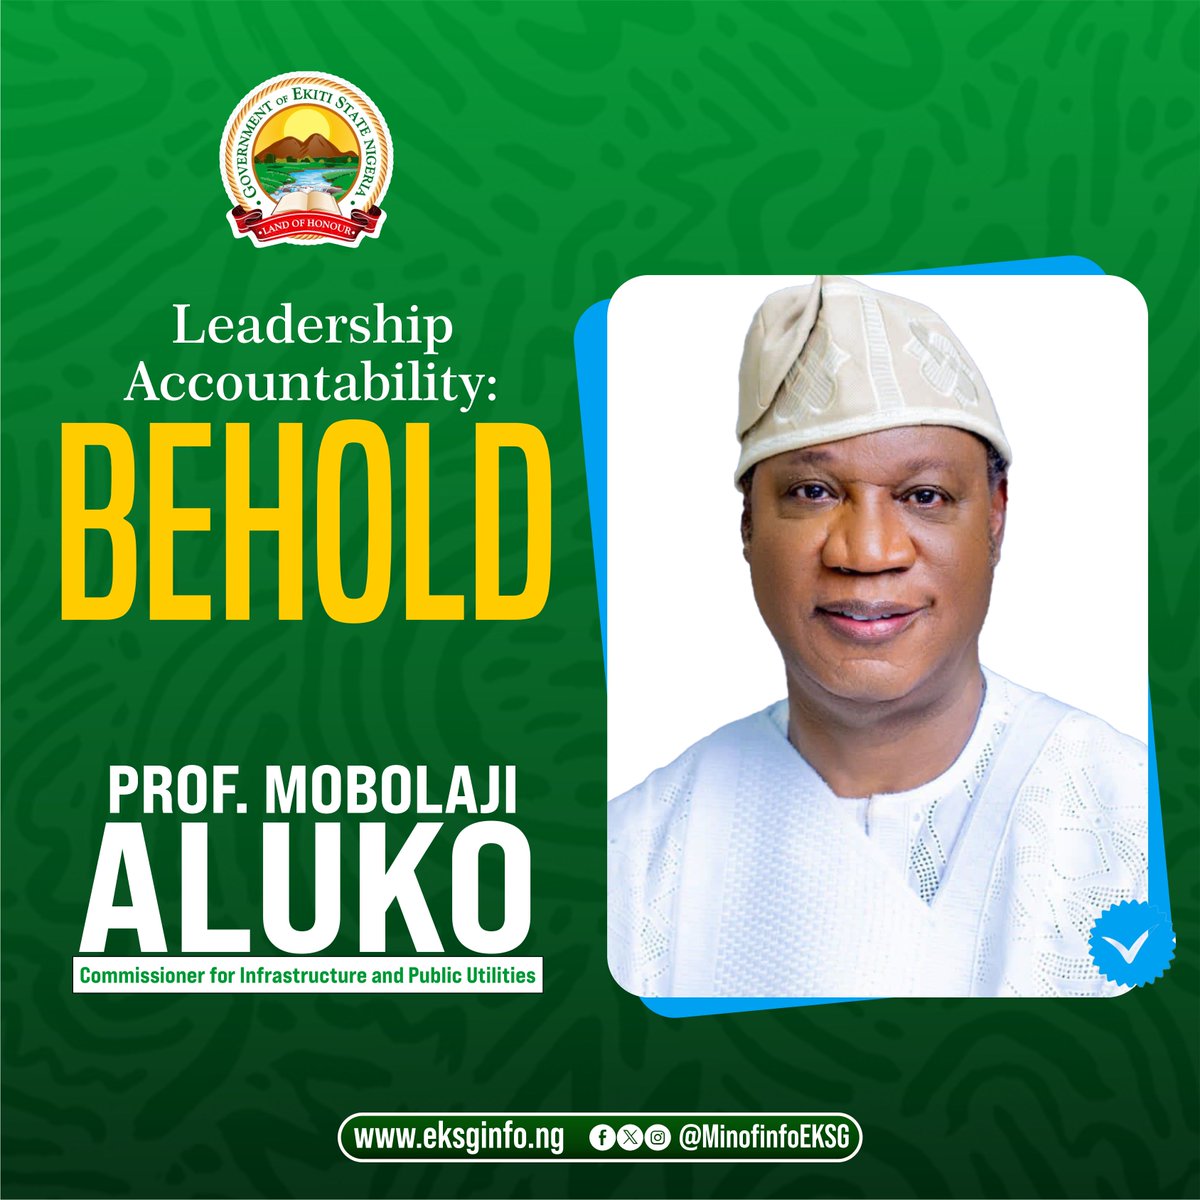 𝐊𝐧𝐨𝐰 𝐘𝐨𝐮𝐫 𝐏𝐮𝐛𝐥𝐢𝐜 𝐎𝐟𝐟𝐢𝐜𝐢𝐚𝐥𝐬... 

Today’s episode features Prof. Mobolaji Aluko, Commissioner for Infrastructure and Public Utilities.

#Governance 
#Ekiti
#PublicInfrastructure
#GovernorOyebanji
#SharedProsperity